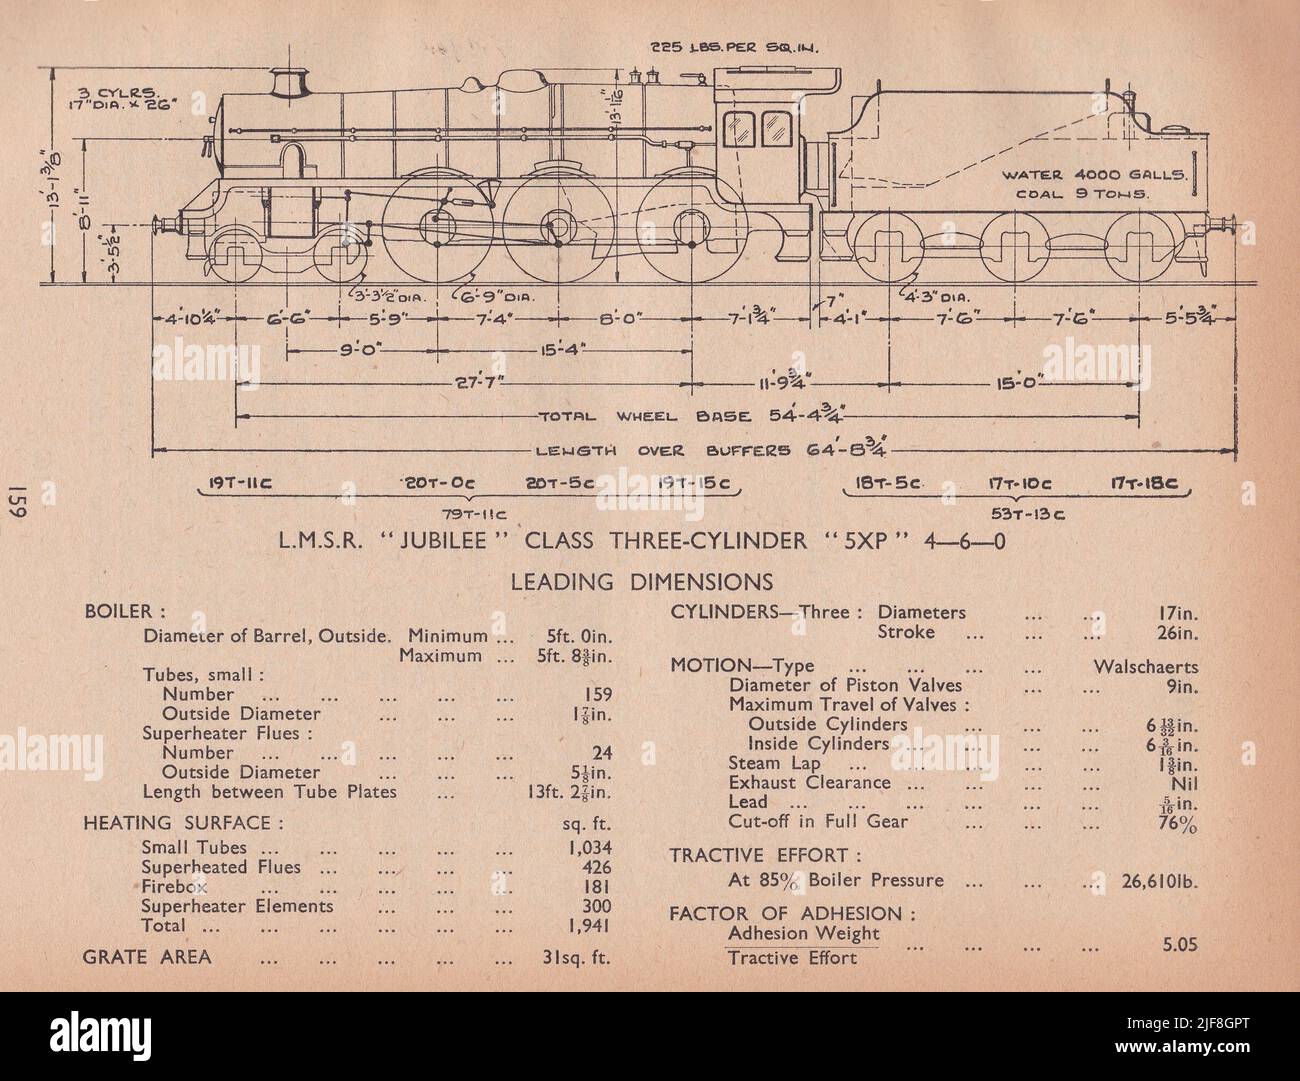 Vintage diagram of a L.M.S.R. Jubilee Class Three-Cylinder 5XP 4-6-0 Leading Dimensions. Stock Photo